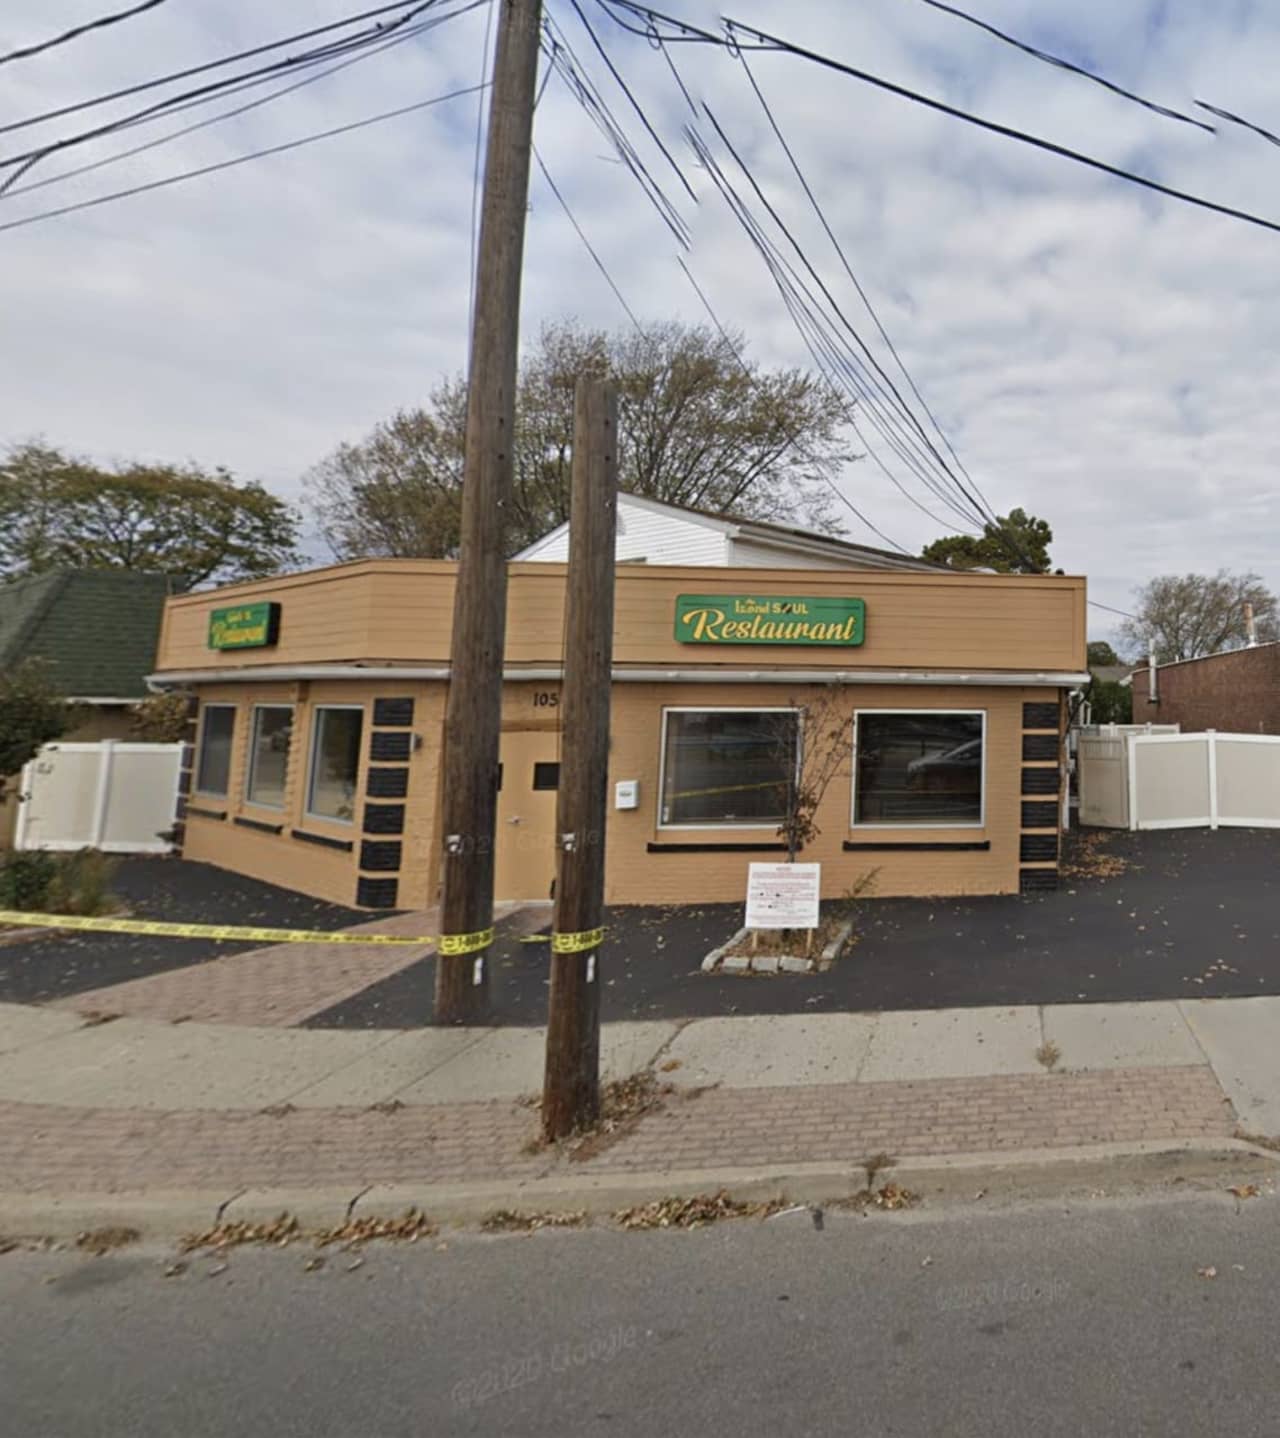 A driver lost control of his vehicle and crashed into a Lindenhurst restaurant.